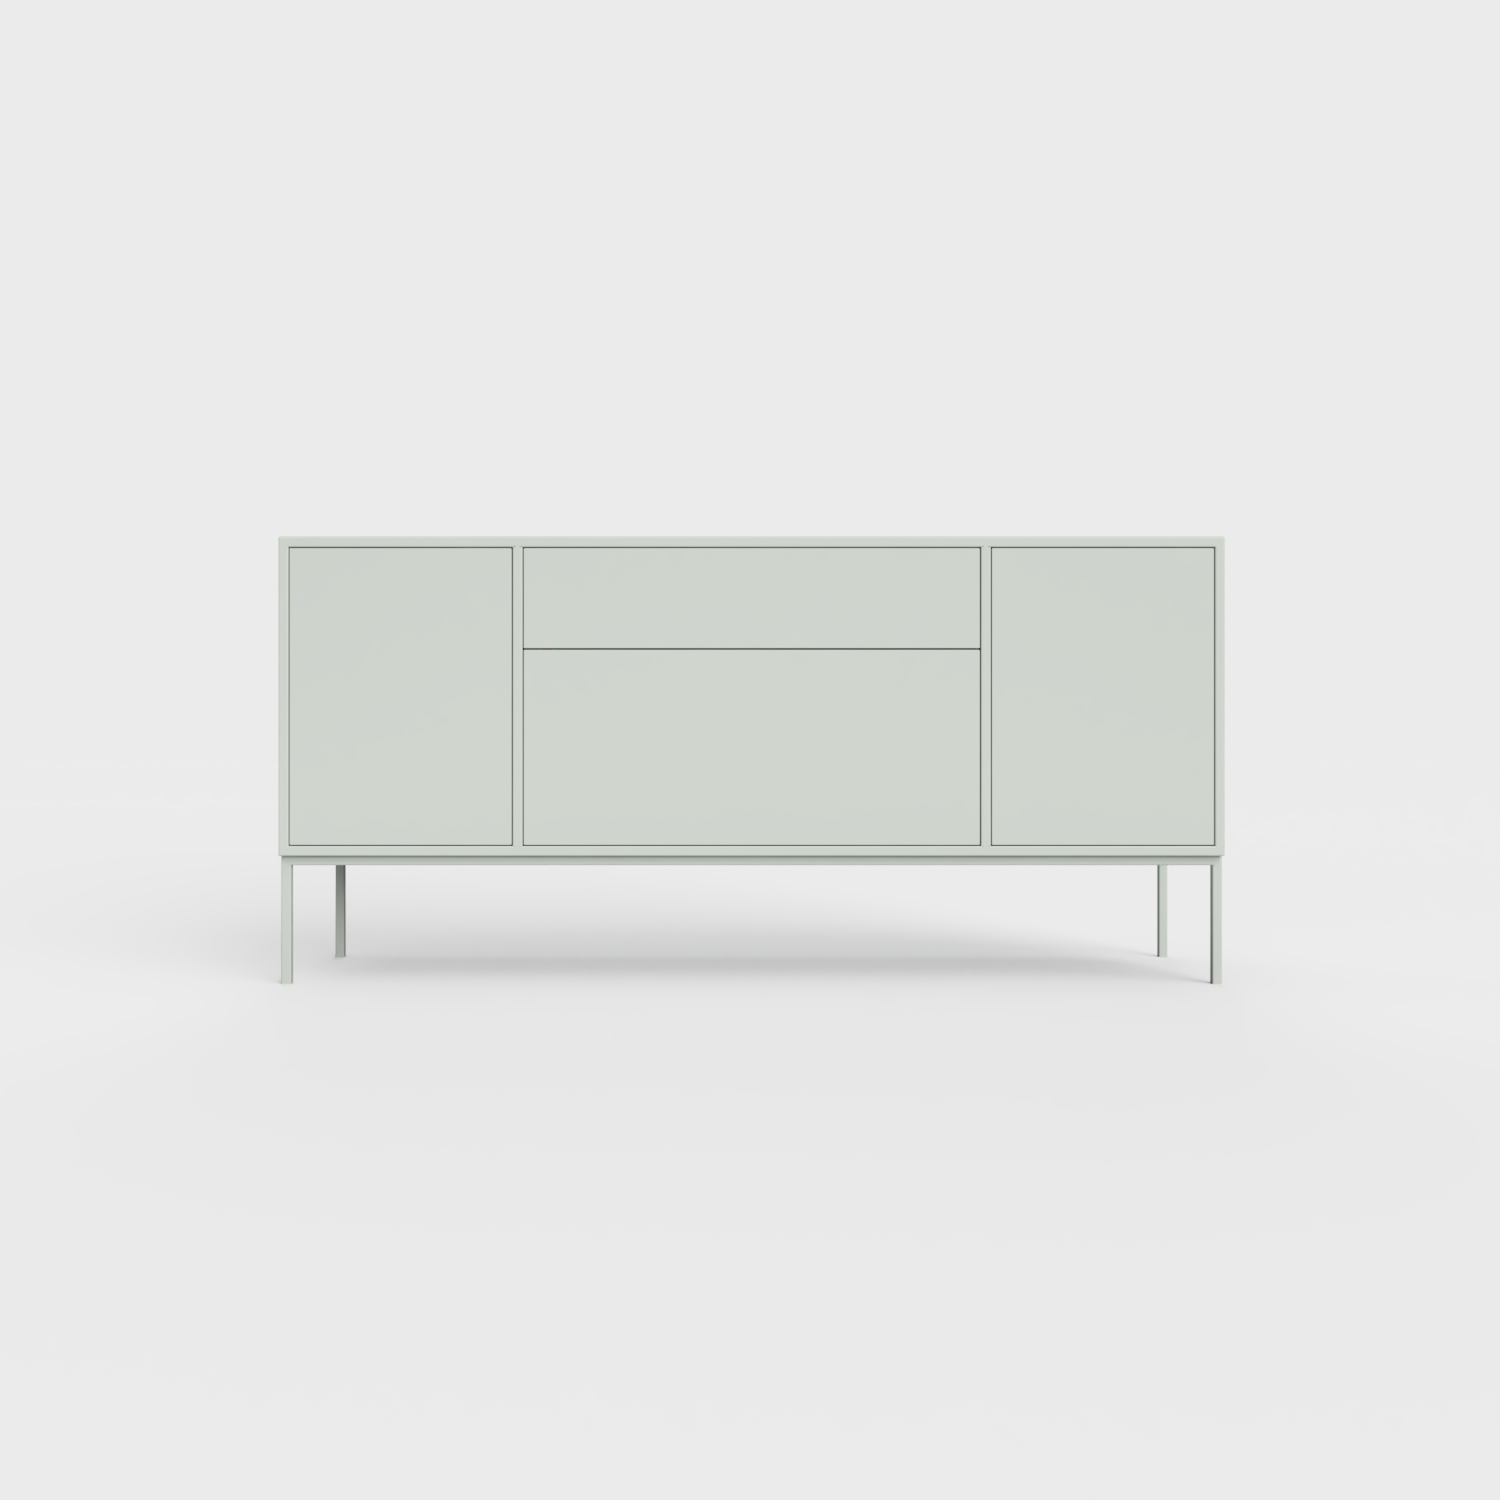 Arnika 02 Sideboard in Light Matcha green color, powder-coated steel, elegant and modern piece of furniture for your living room